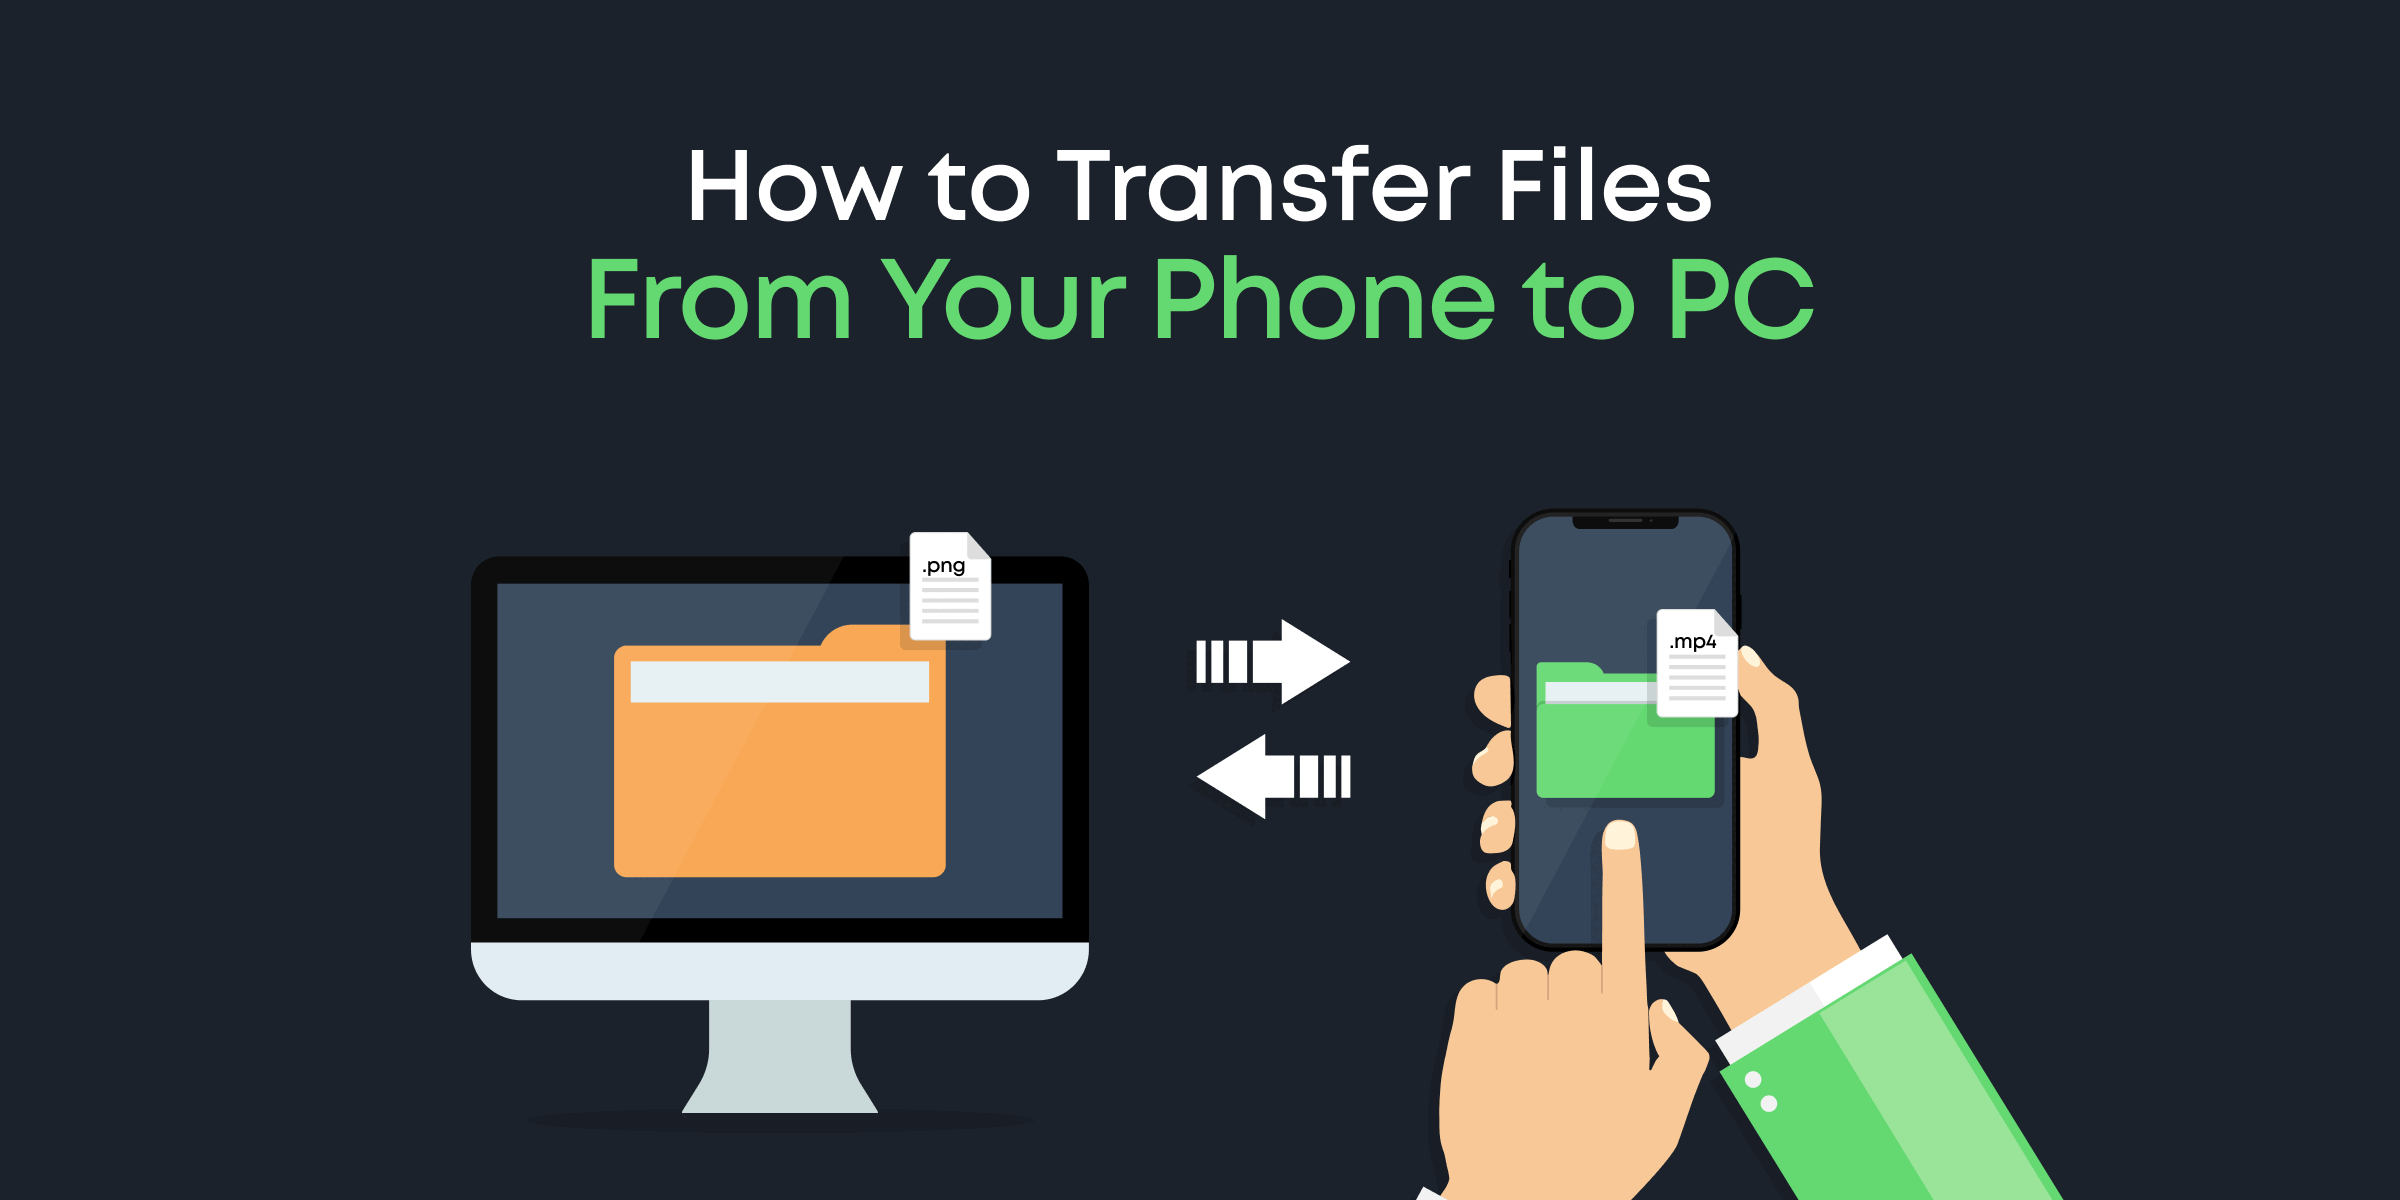 How to Transfer Files From Your Phone to PC